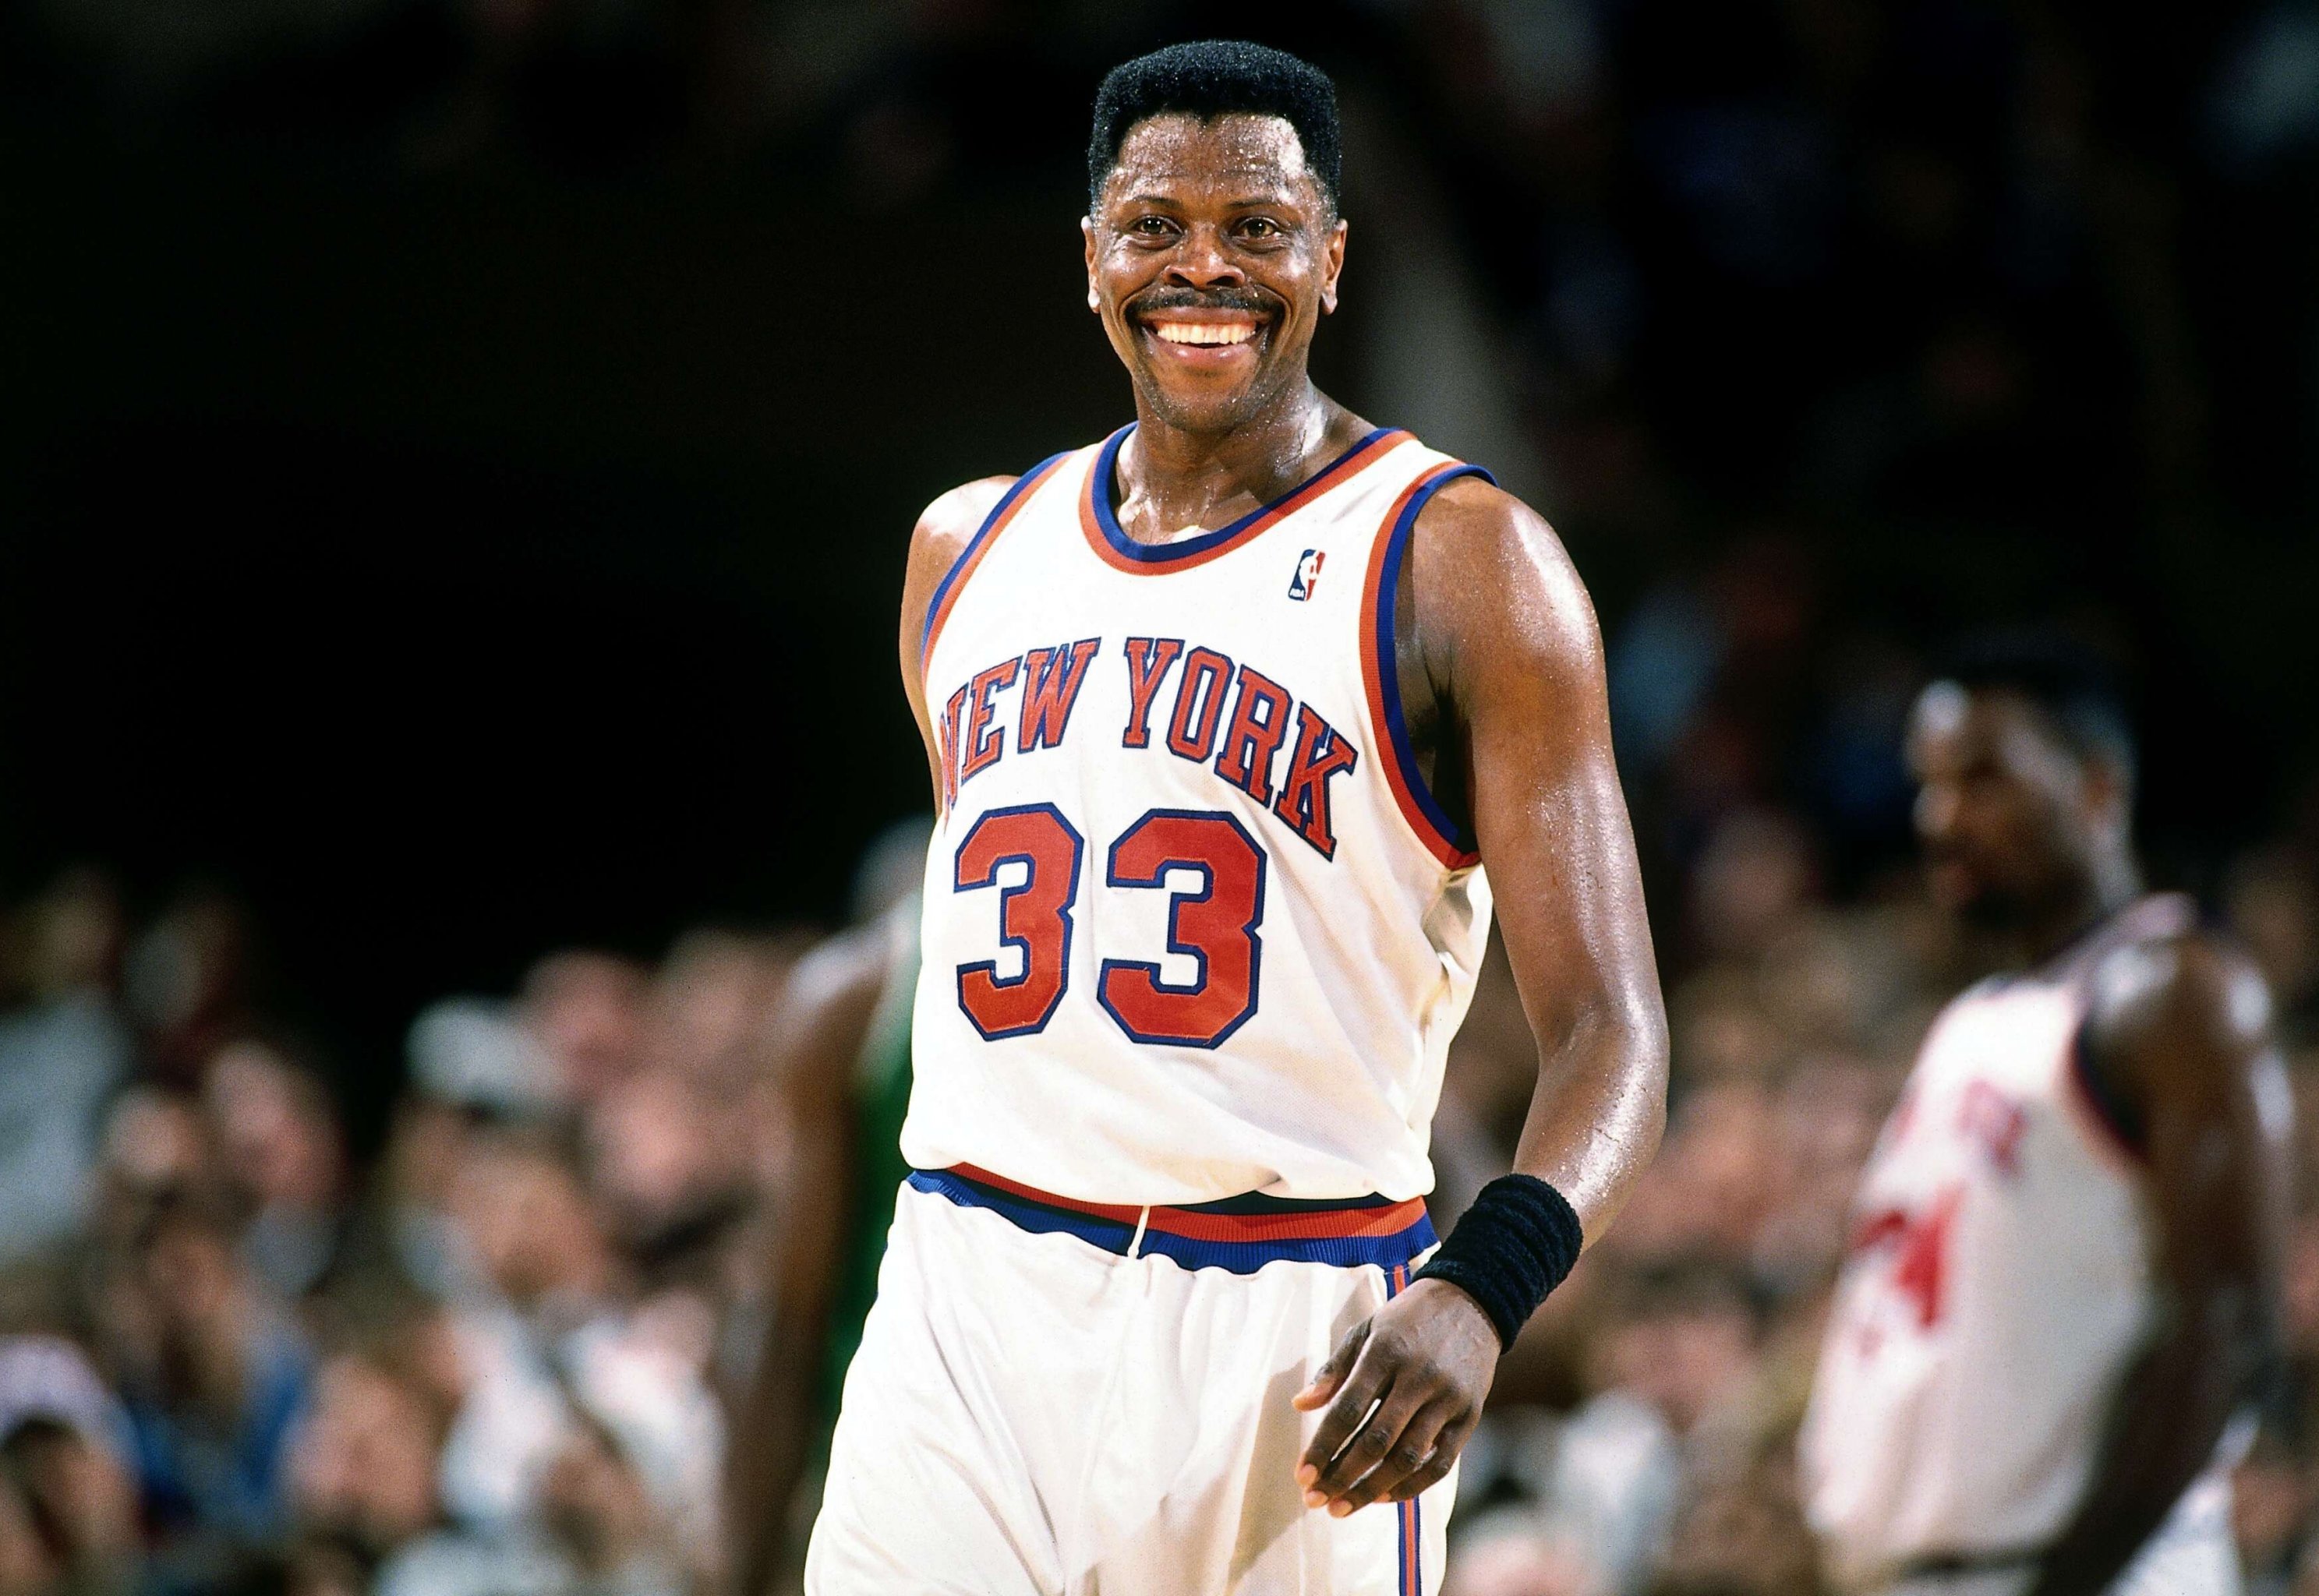 Bleacher Report's All-Time Player Rankings: NBA's Top 50 Revealed